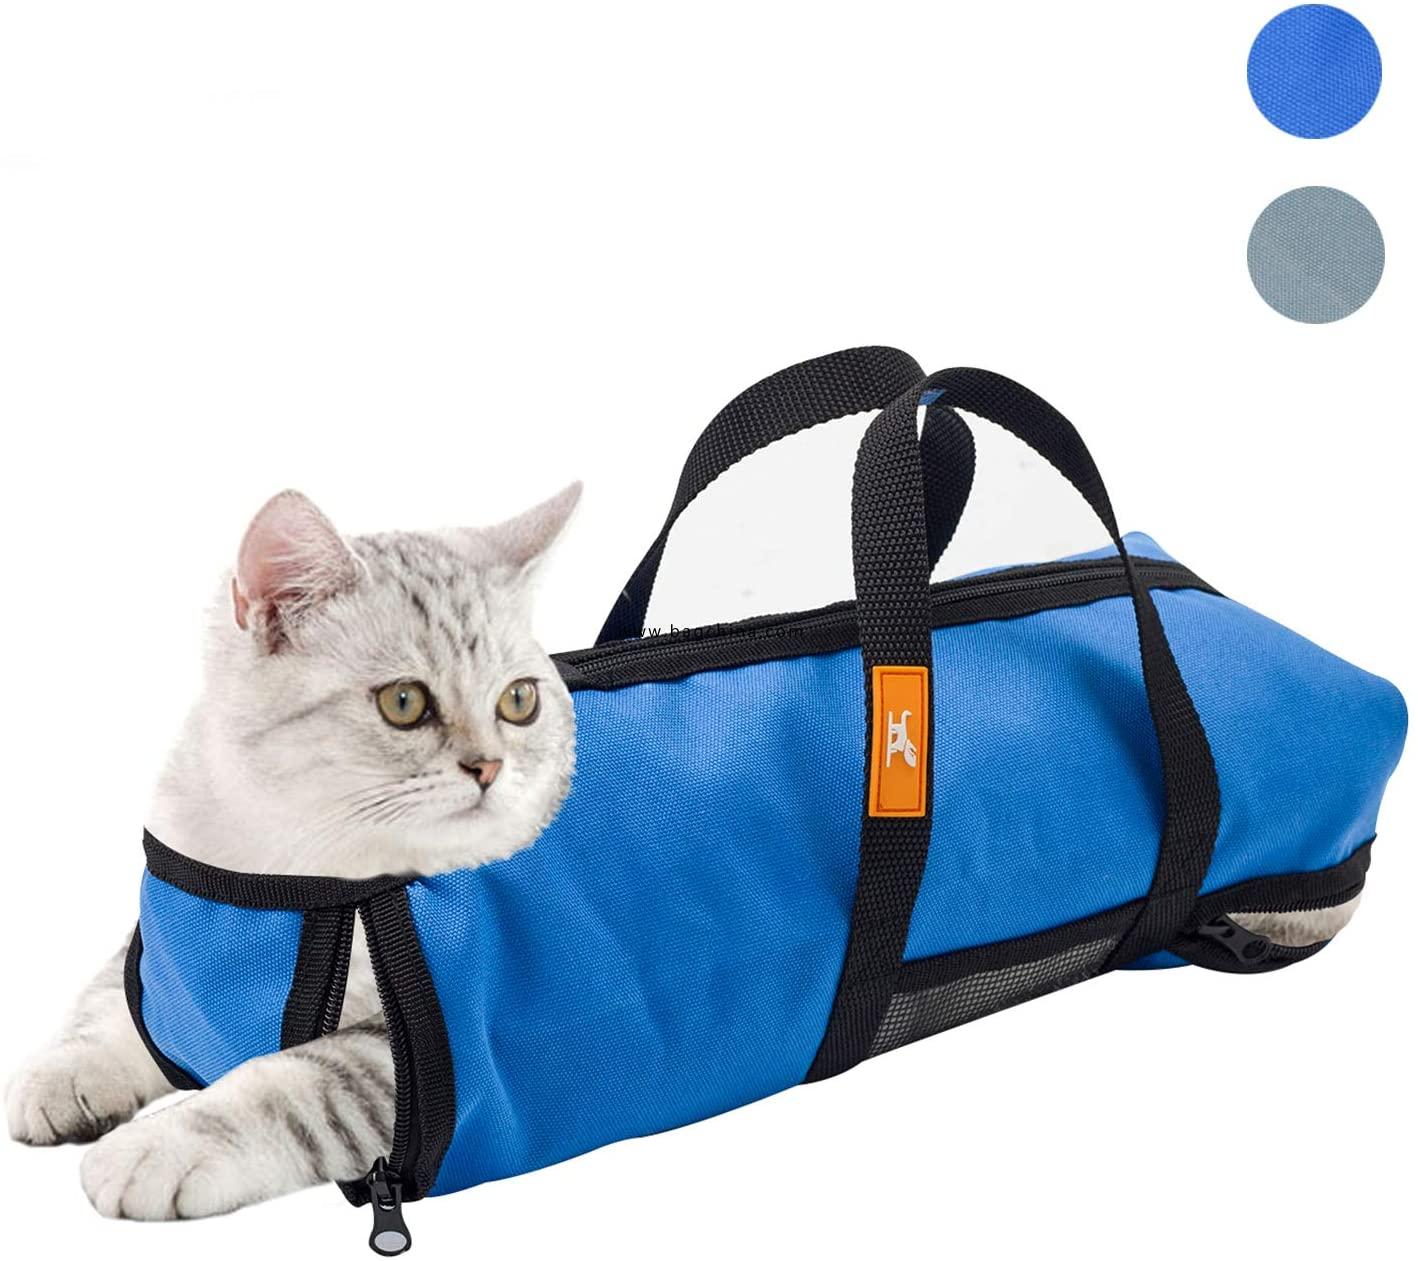 Cat Grooming Restraint Bag Tote,4 sizes available